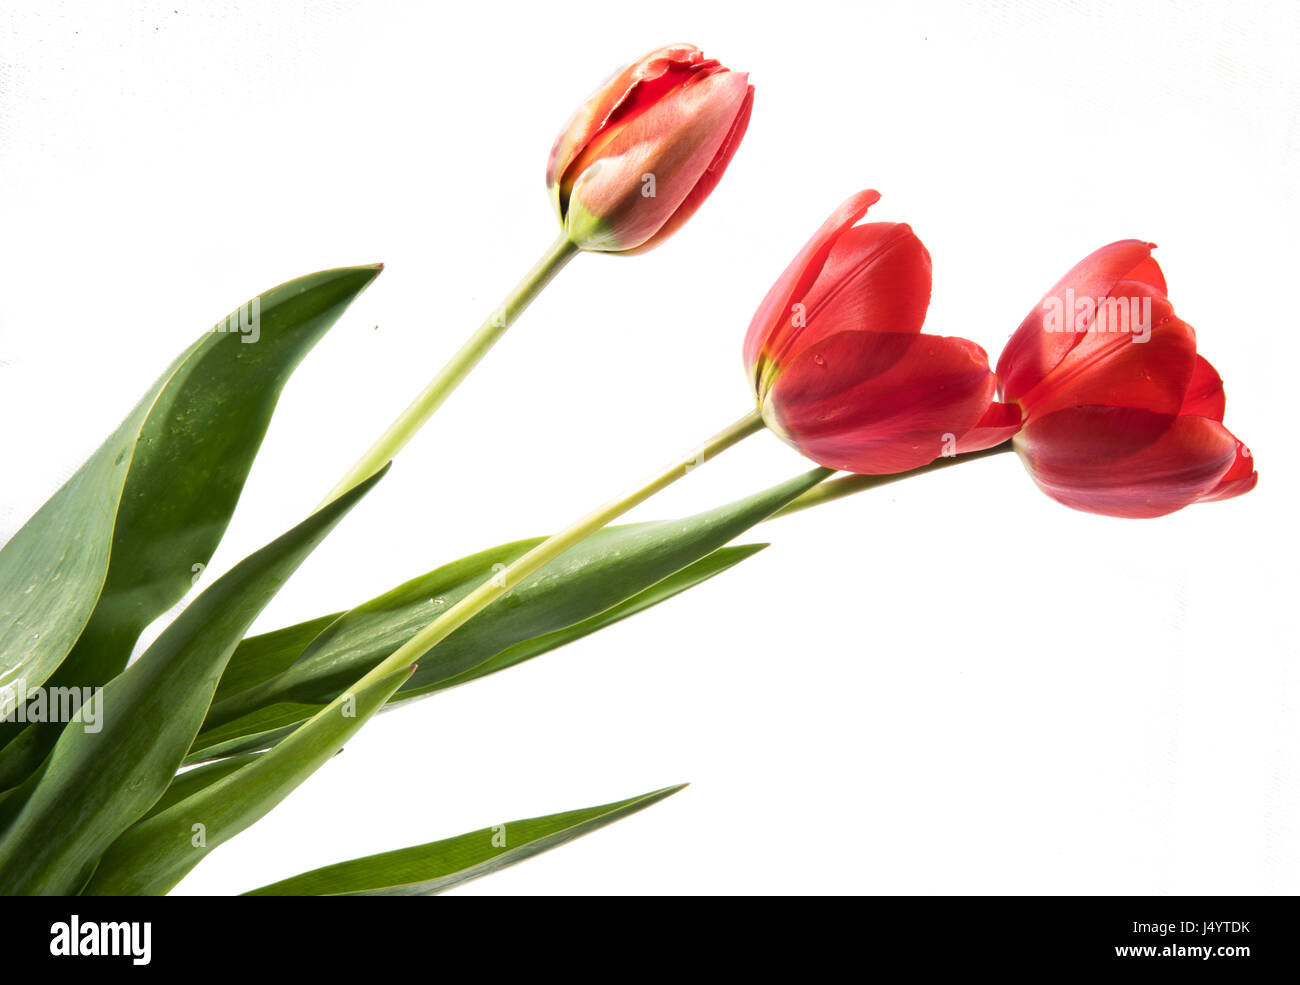 Set of three red color tulips isolated on white background Stock Photo